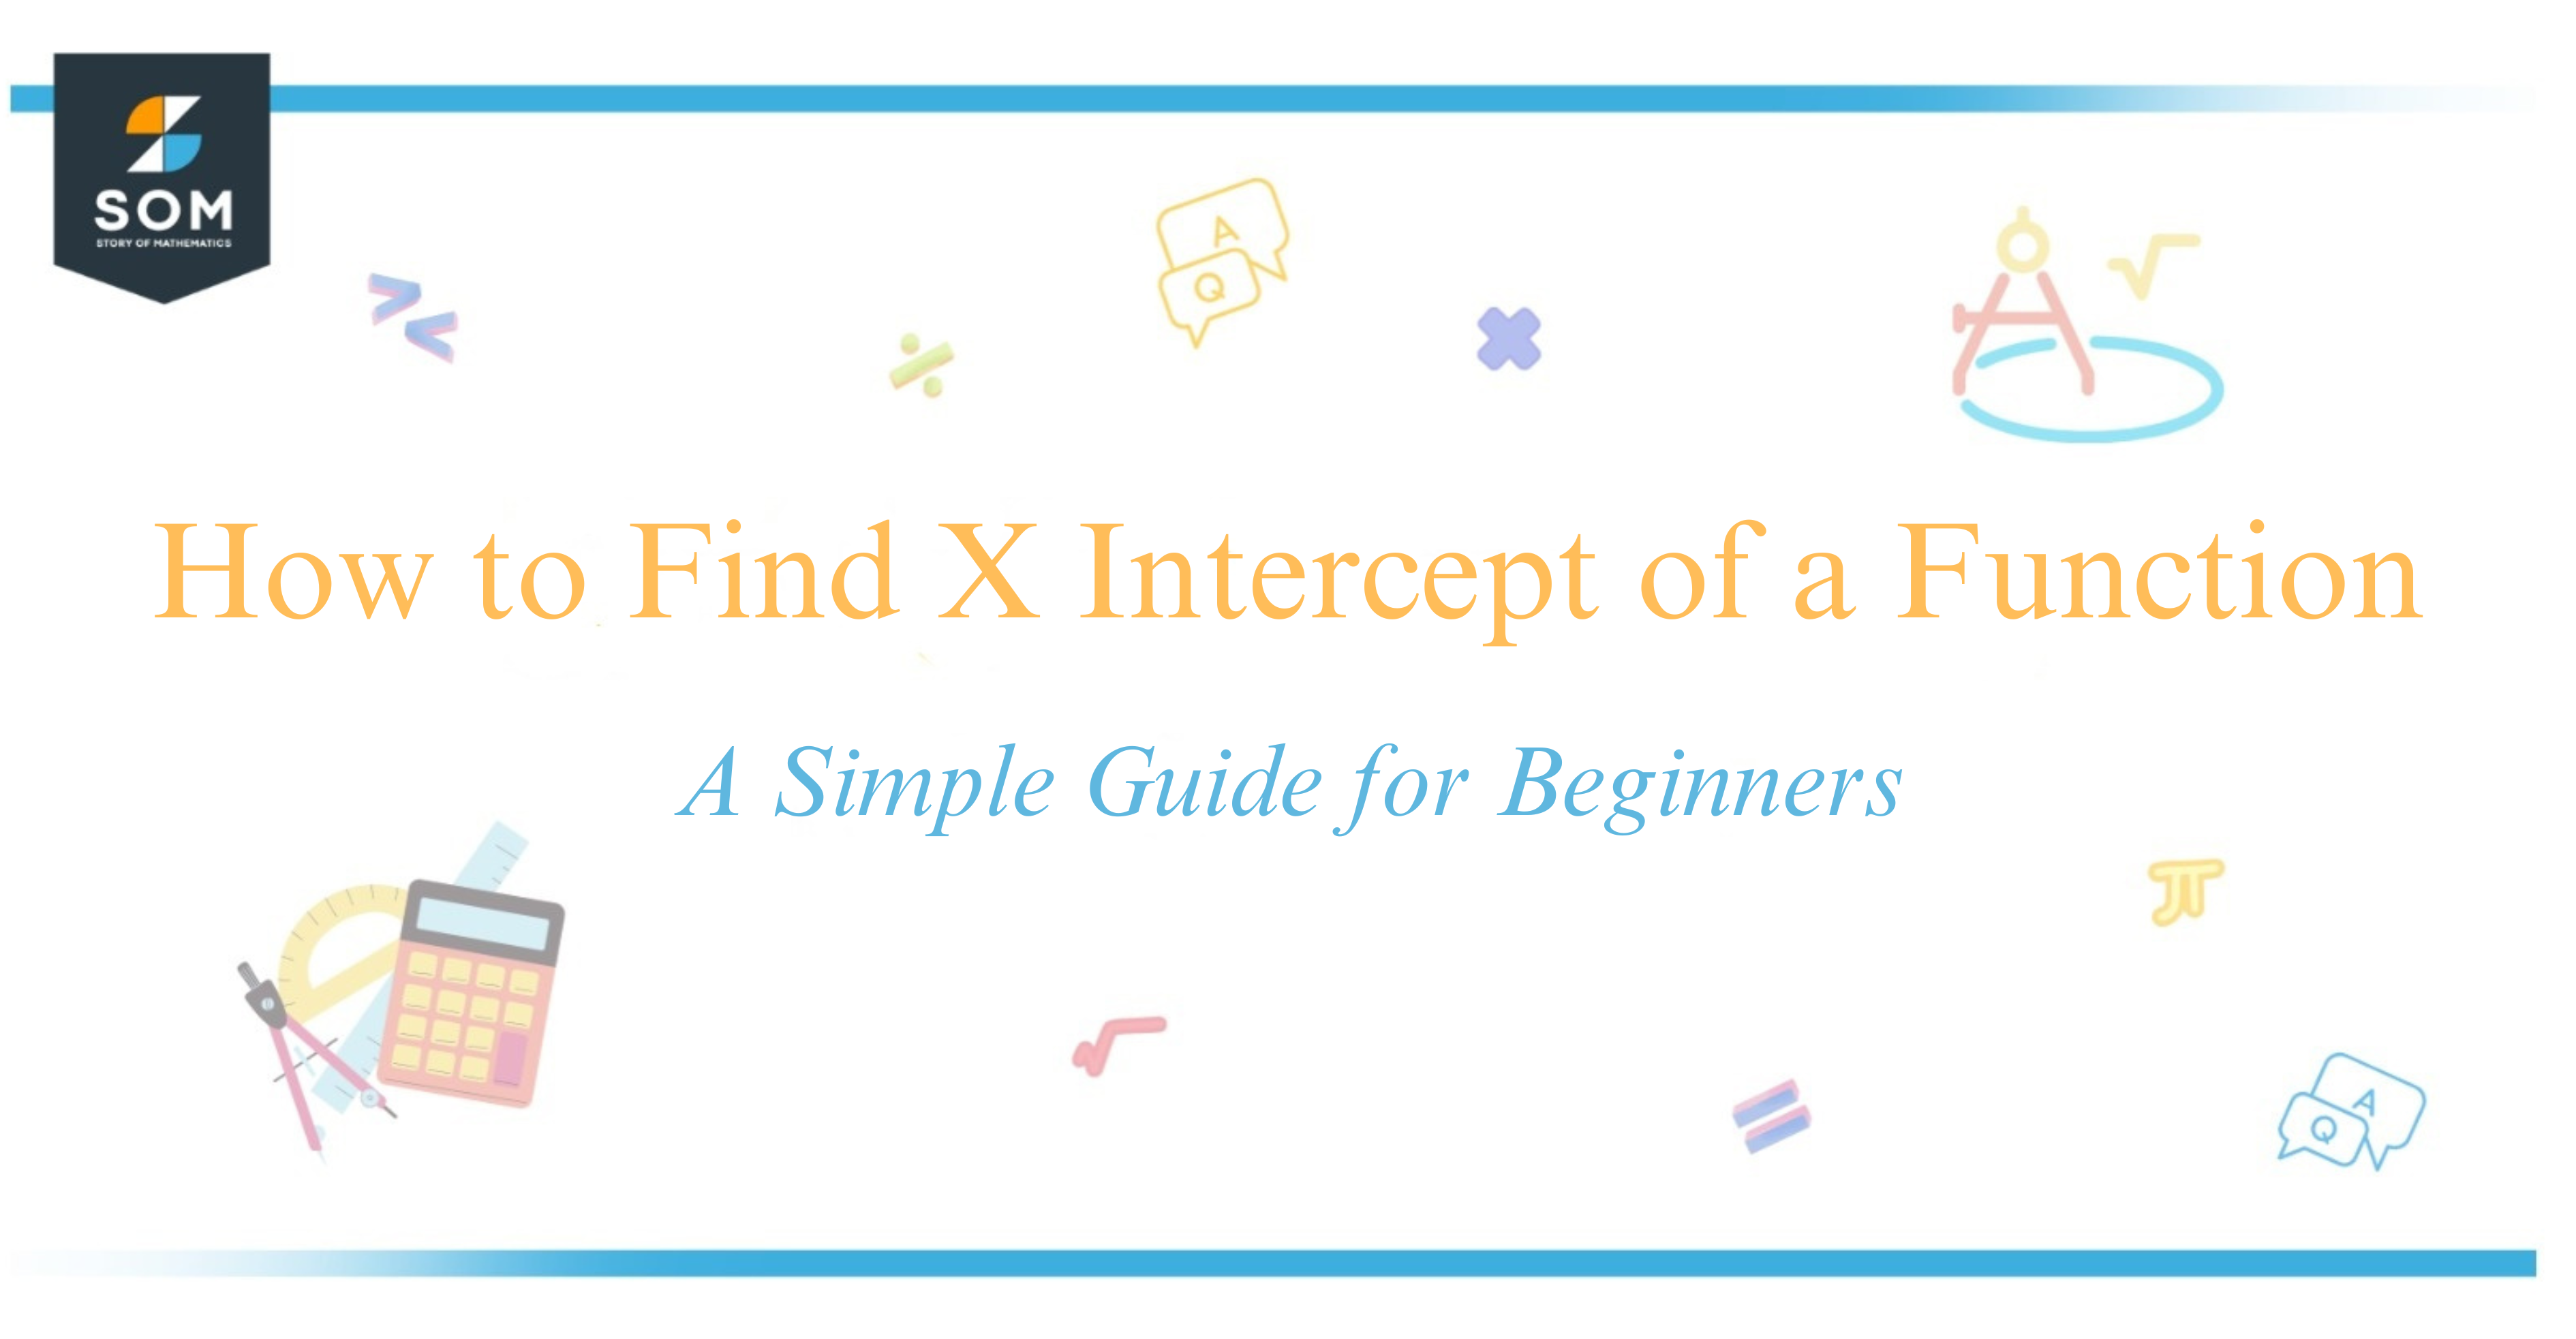 How to Find X Intercept of a Function A Simple Guide for Beginners